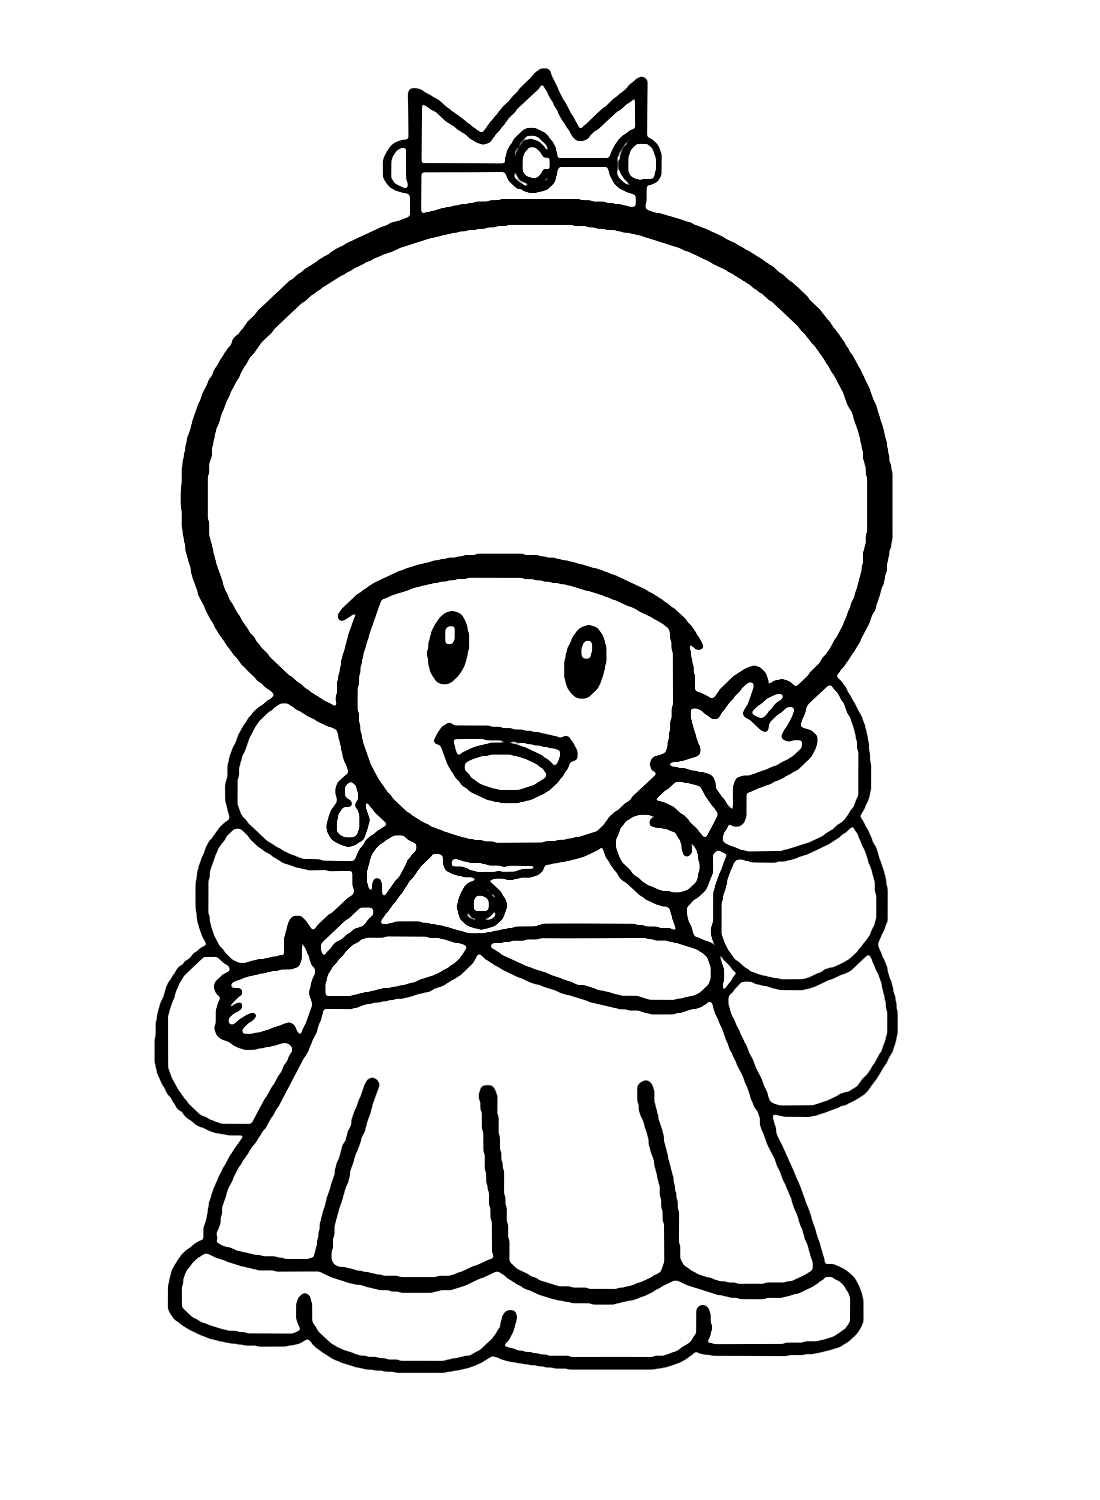 Toadette Princess Coloring Page